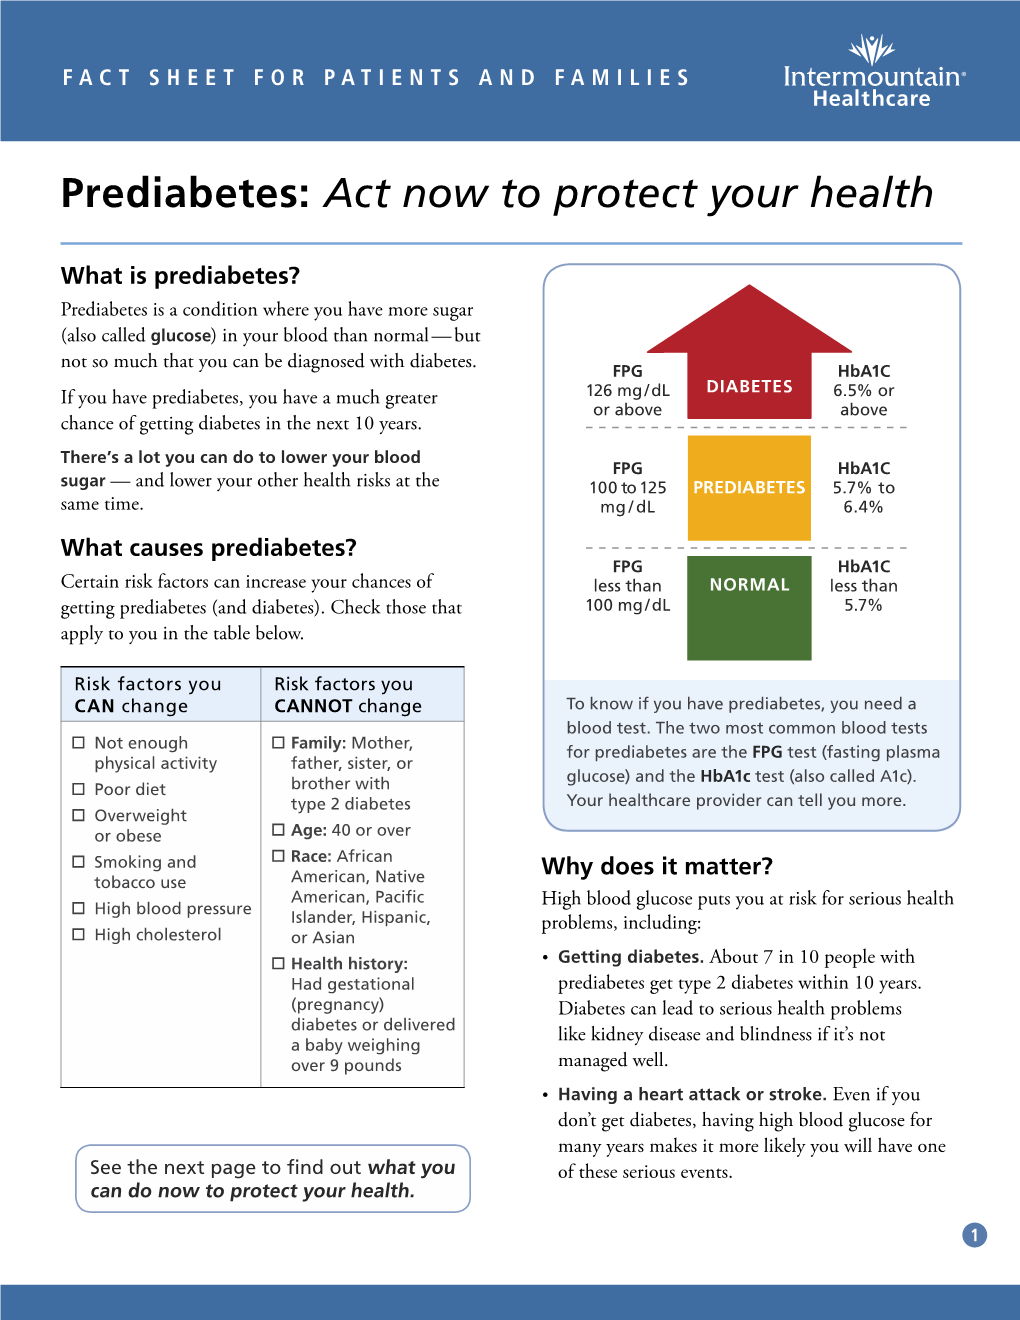 Prediabetes: Act Now to Protect Your Health